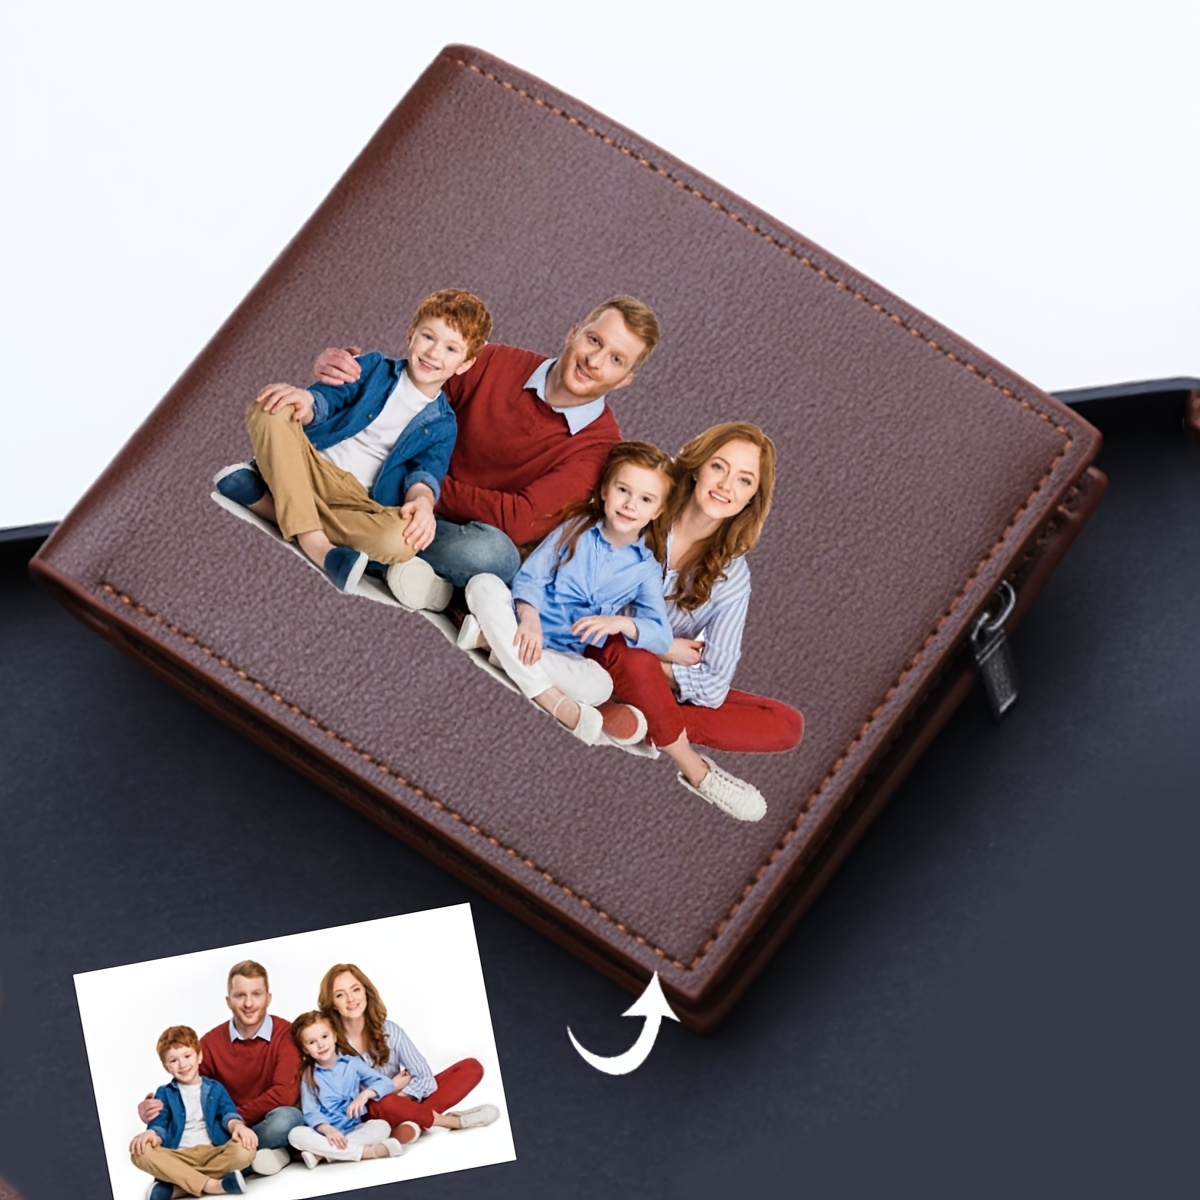 

Personalized Men's Leather Wallet - Custom Photo & Text, Elegant Bi-fold Design, Perfect Gift For Dad, Husband, Fiancé - Black, 4.7x3.9x0.7 Inches